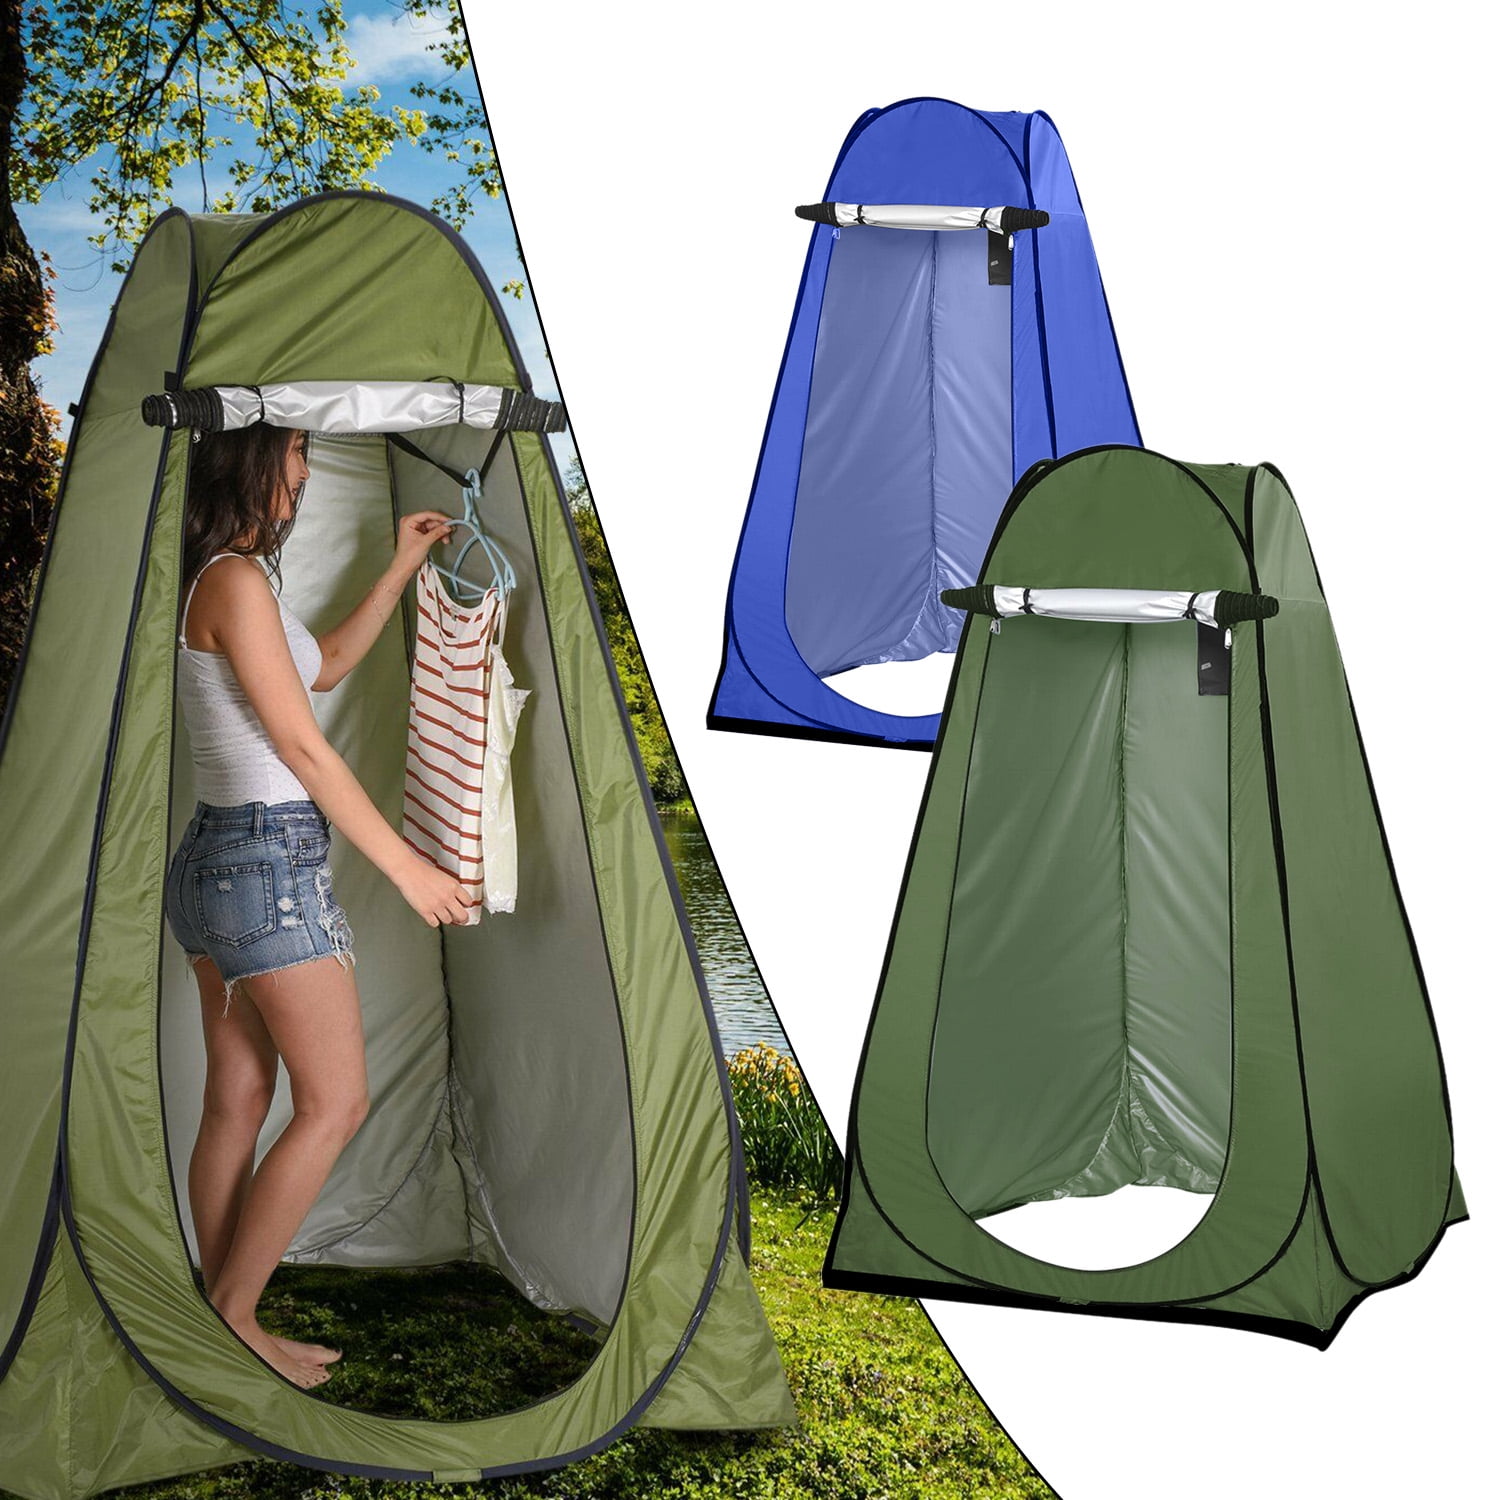 EKDJKK Po p Up Privacy Tent Camp Toilet Tent with Carrying Bag for Camping Hiking Beach Picnic Fishing Green Portable Outdoor Shower Tent Dressing Changing Room Privacy Shelters Room 